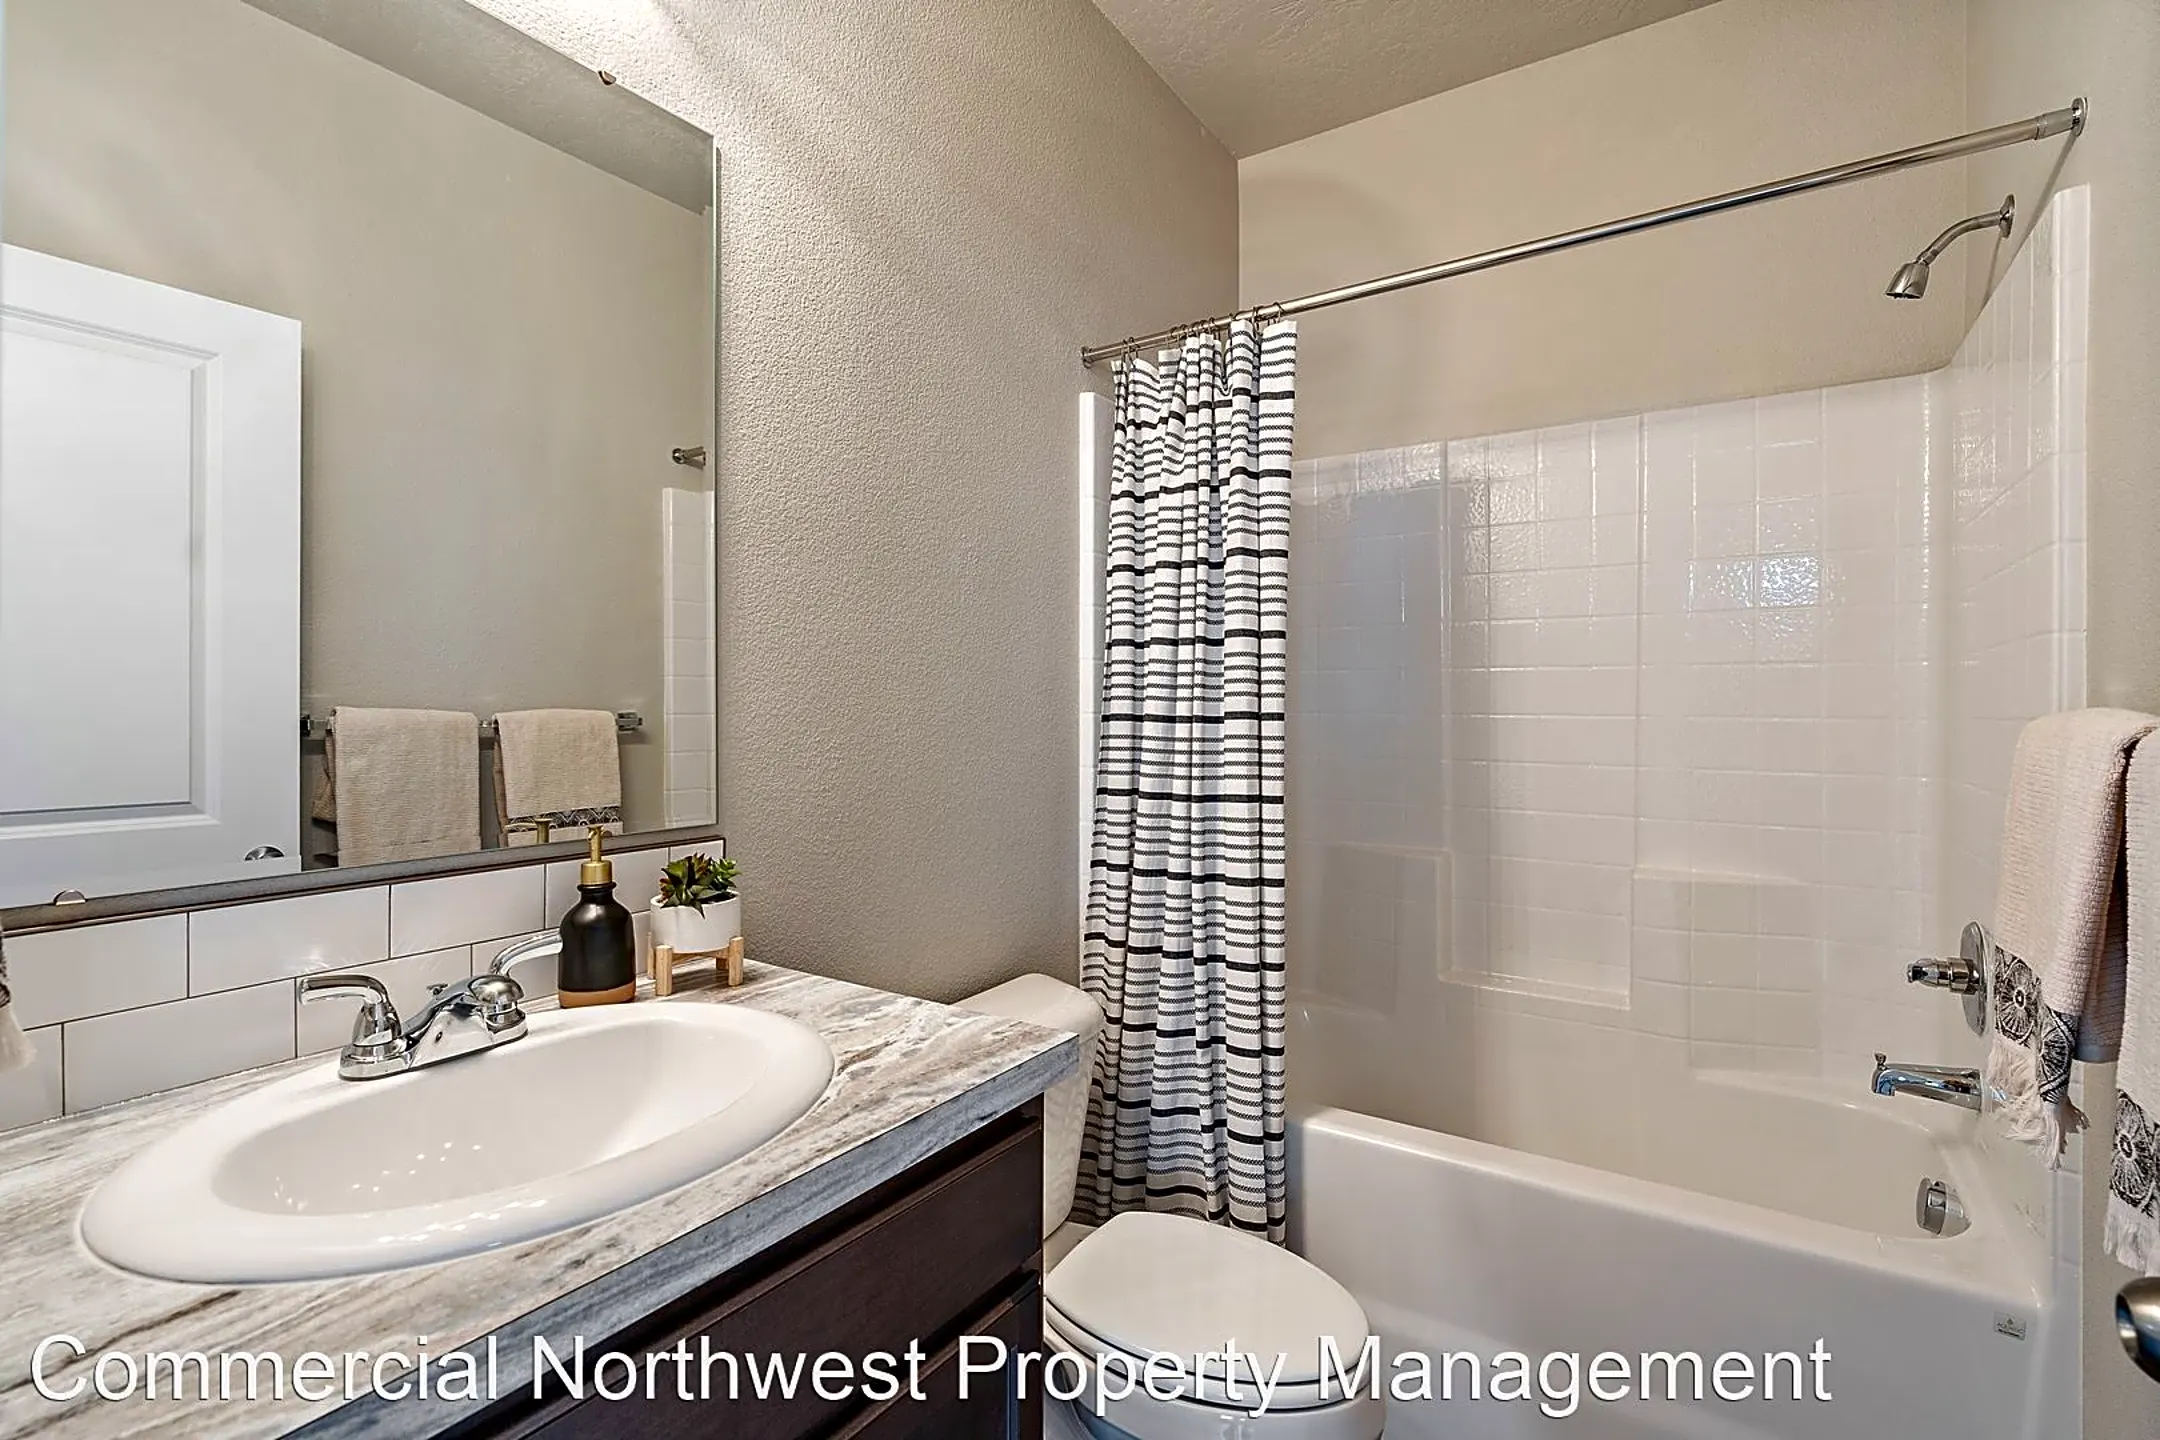 Bathroom - Sunnyvale Village ! 1 Month Free for All Move-ins before 3/15! - Nampa, ID